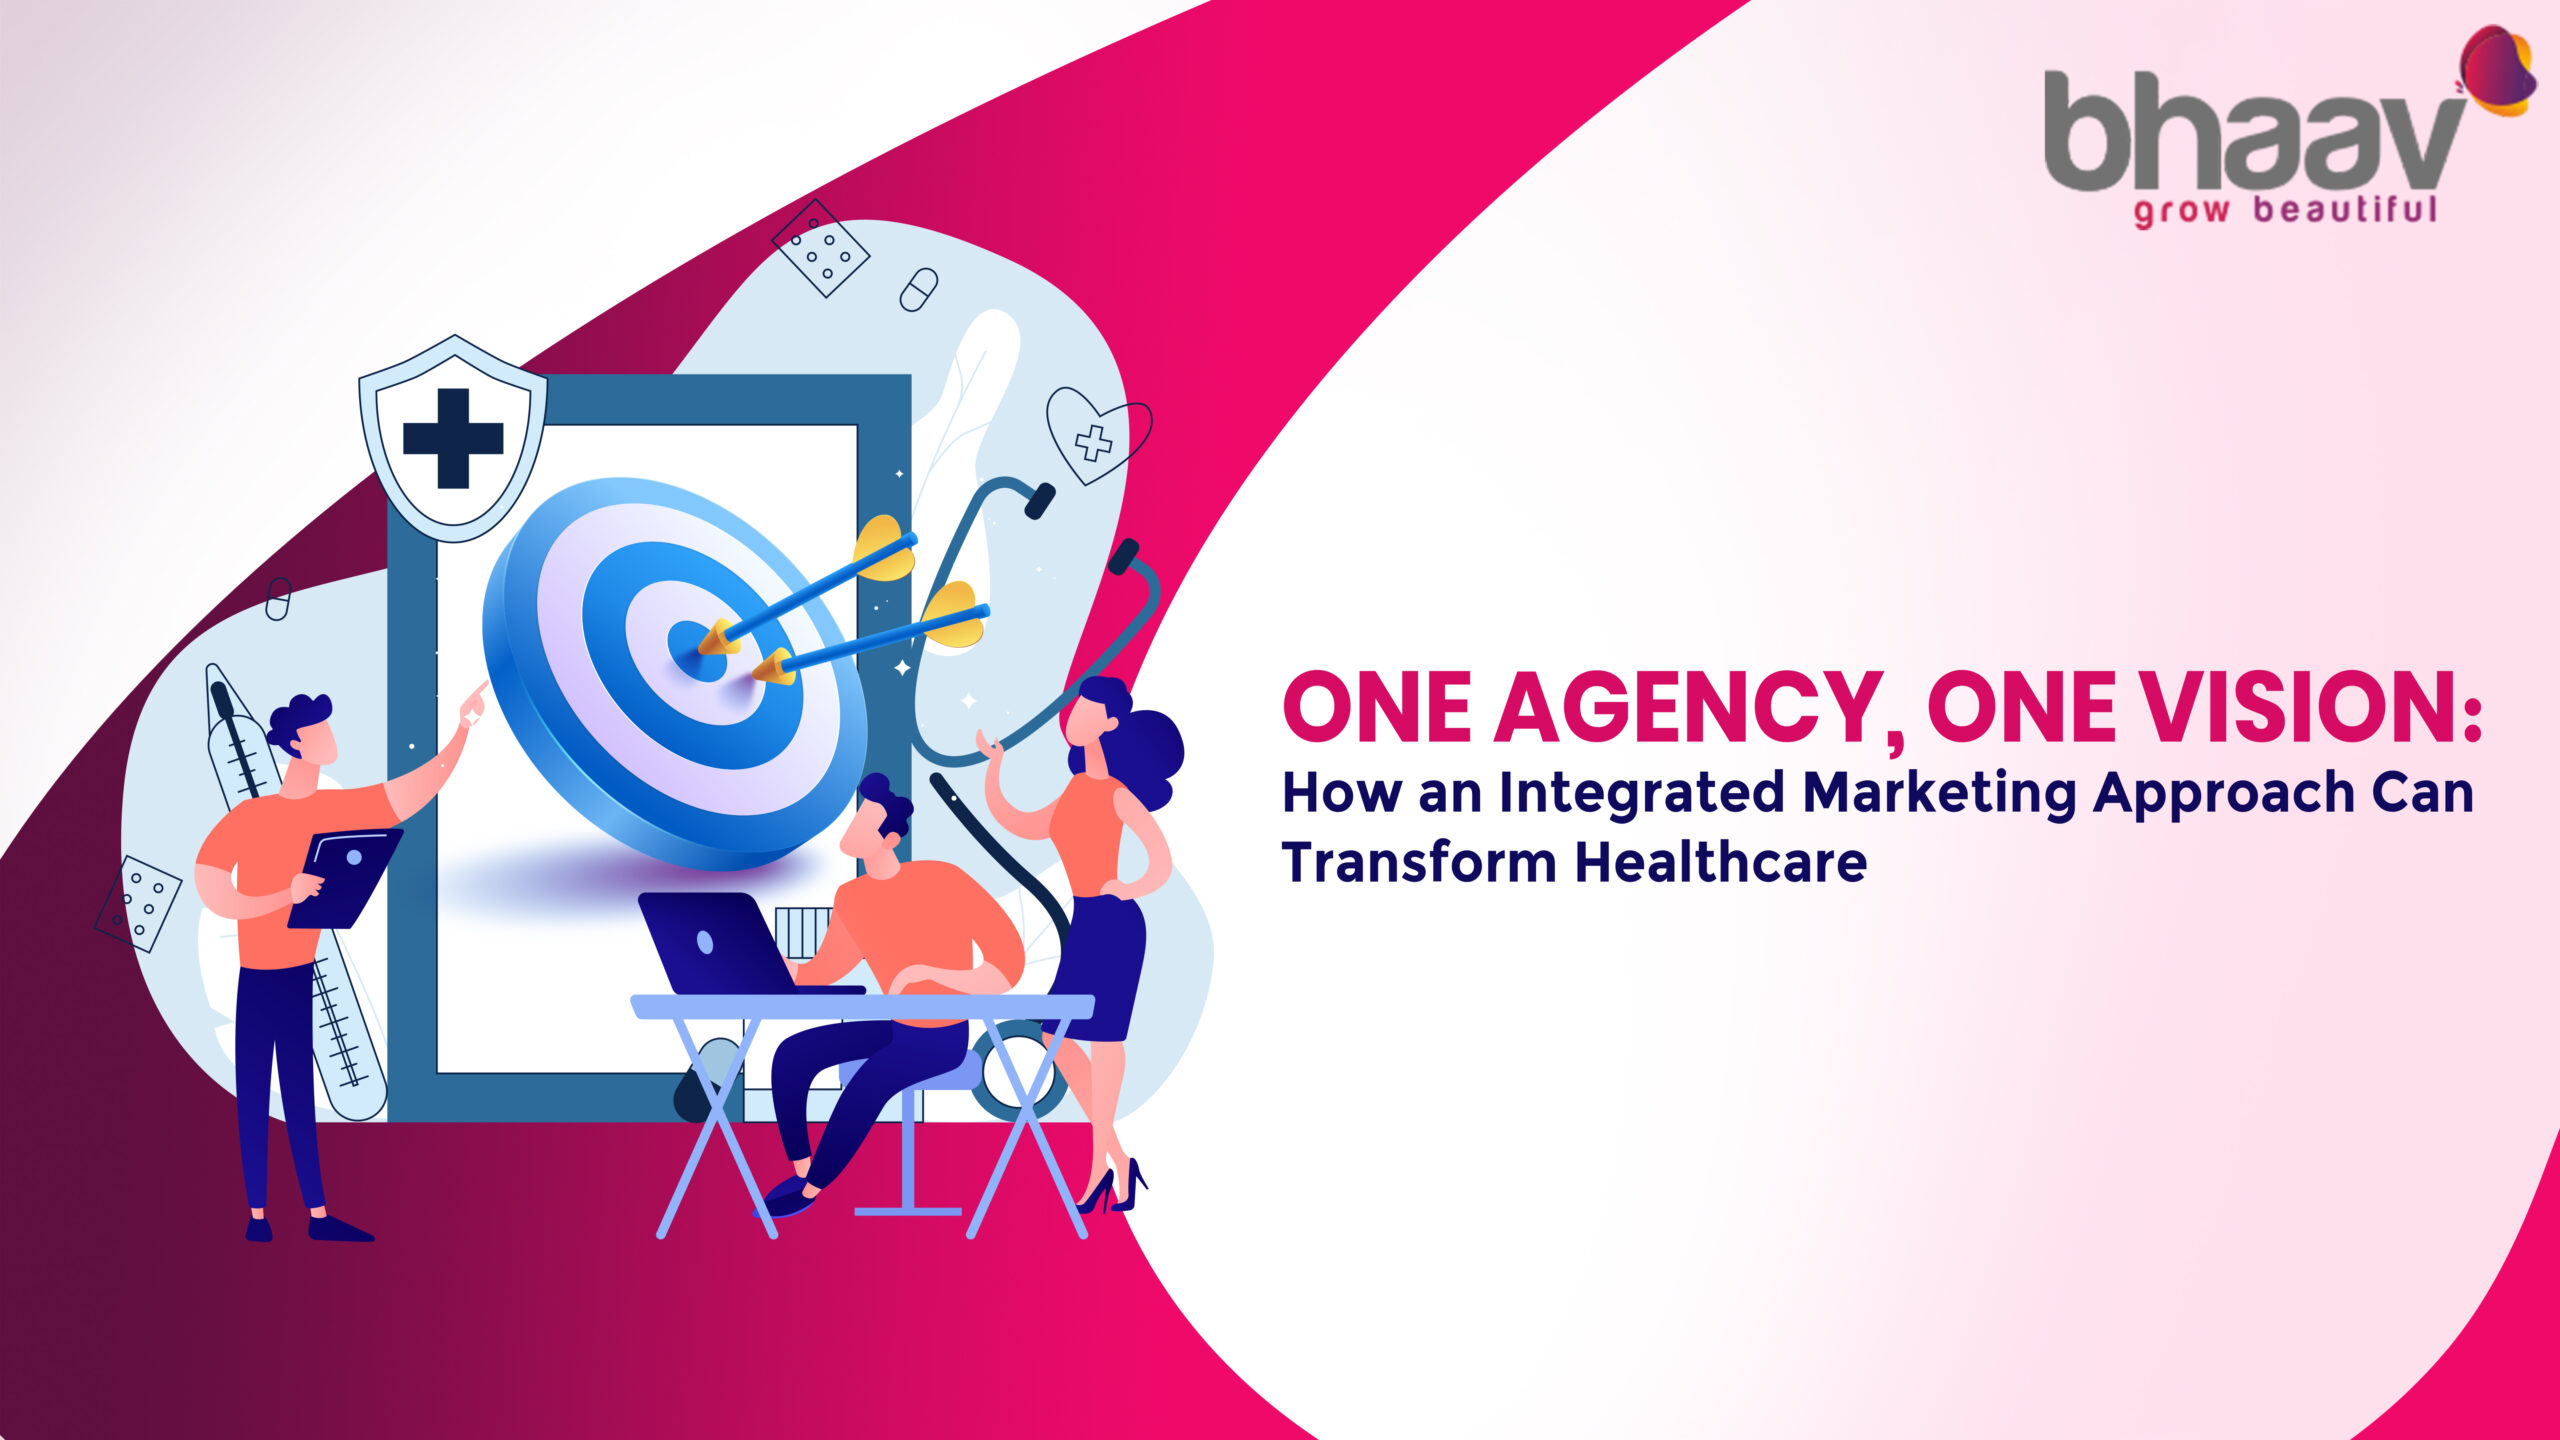 integrated-marketing-approach-can-transform-healthcare